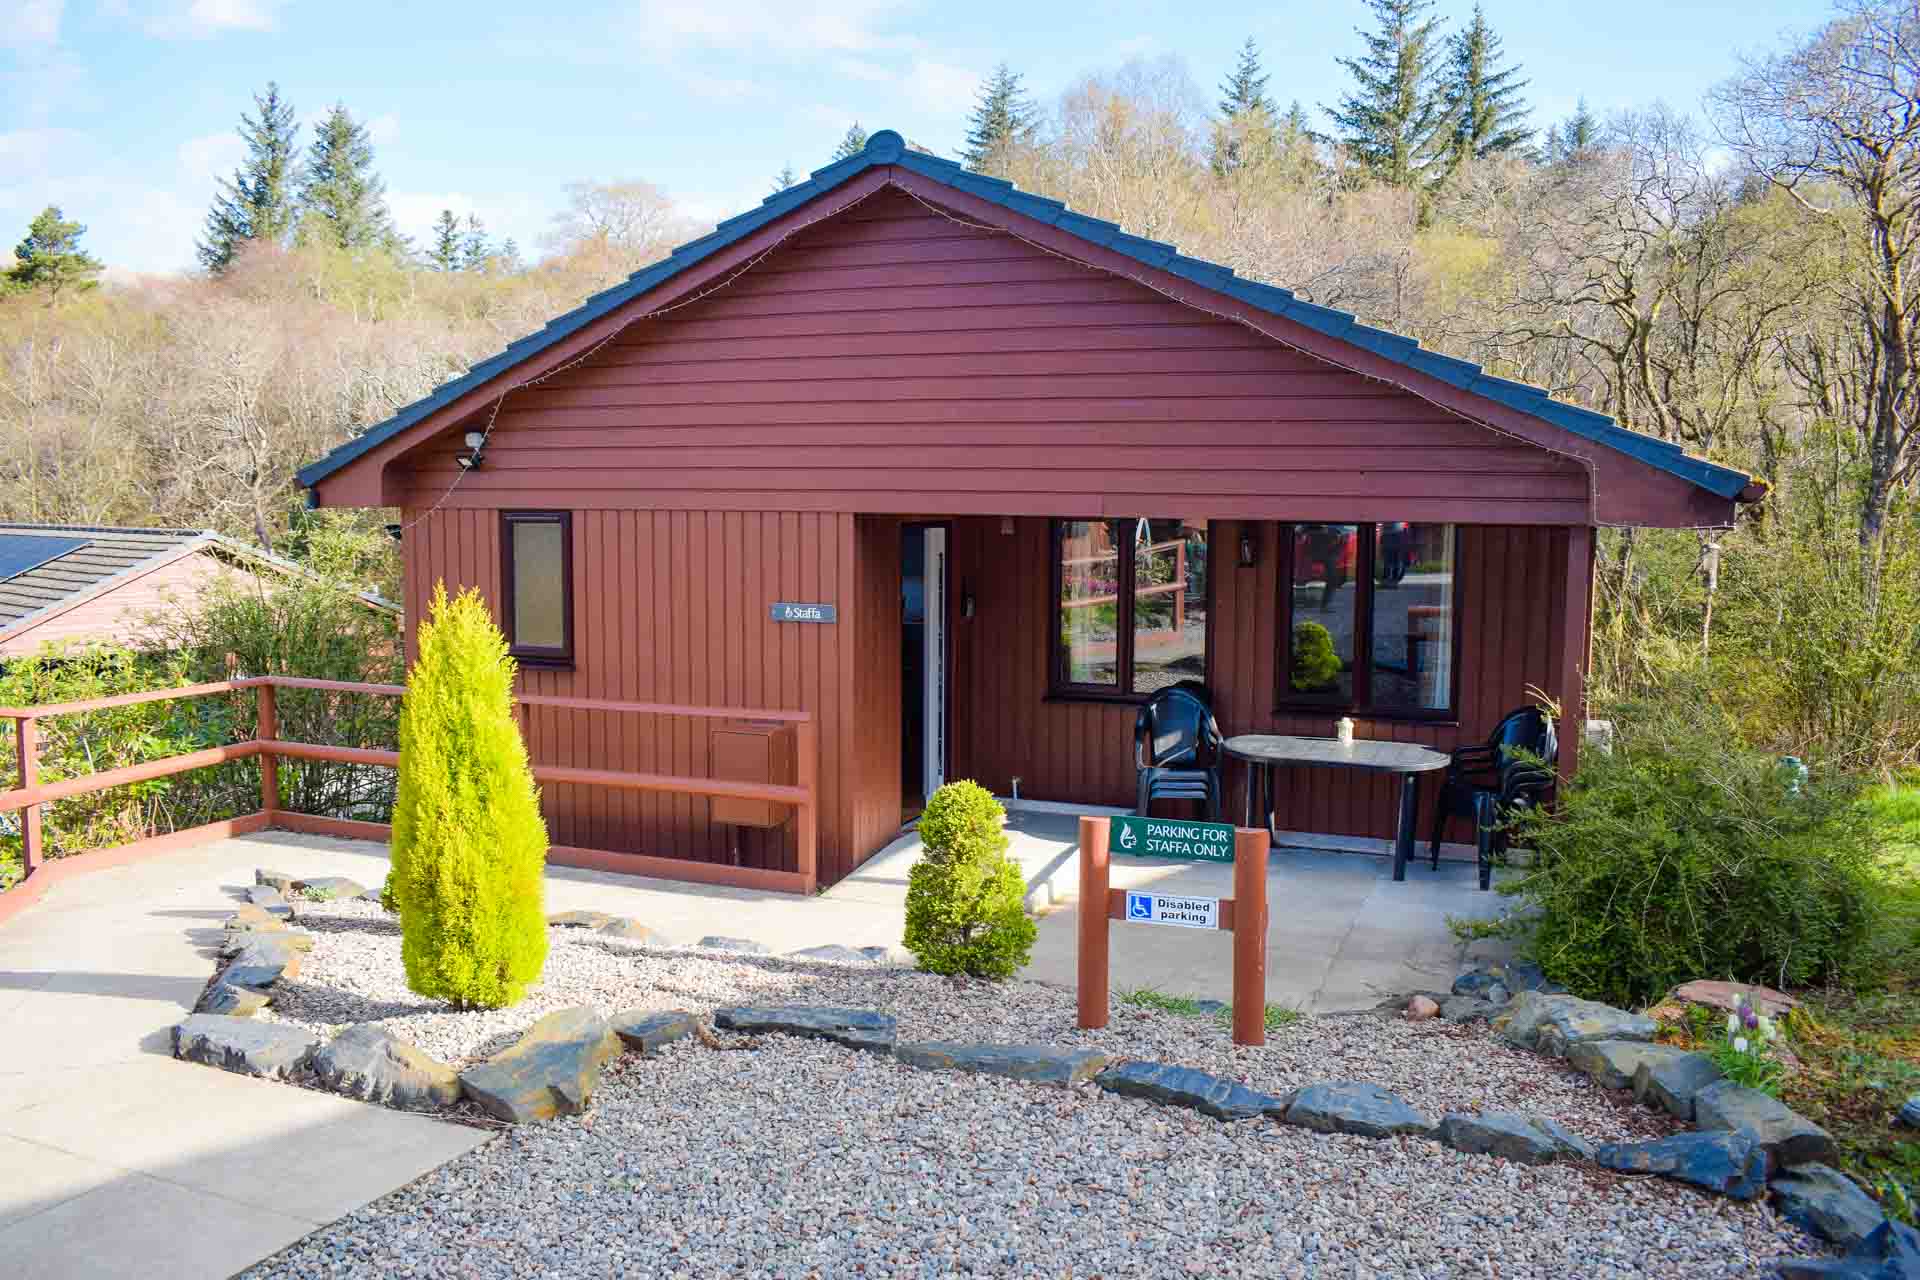 Our Staffa Lodge offers accessible accommodation with parking right outside.